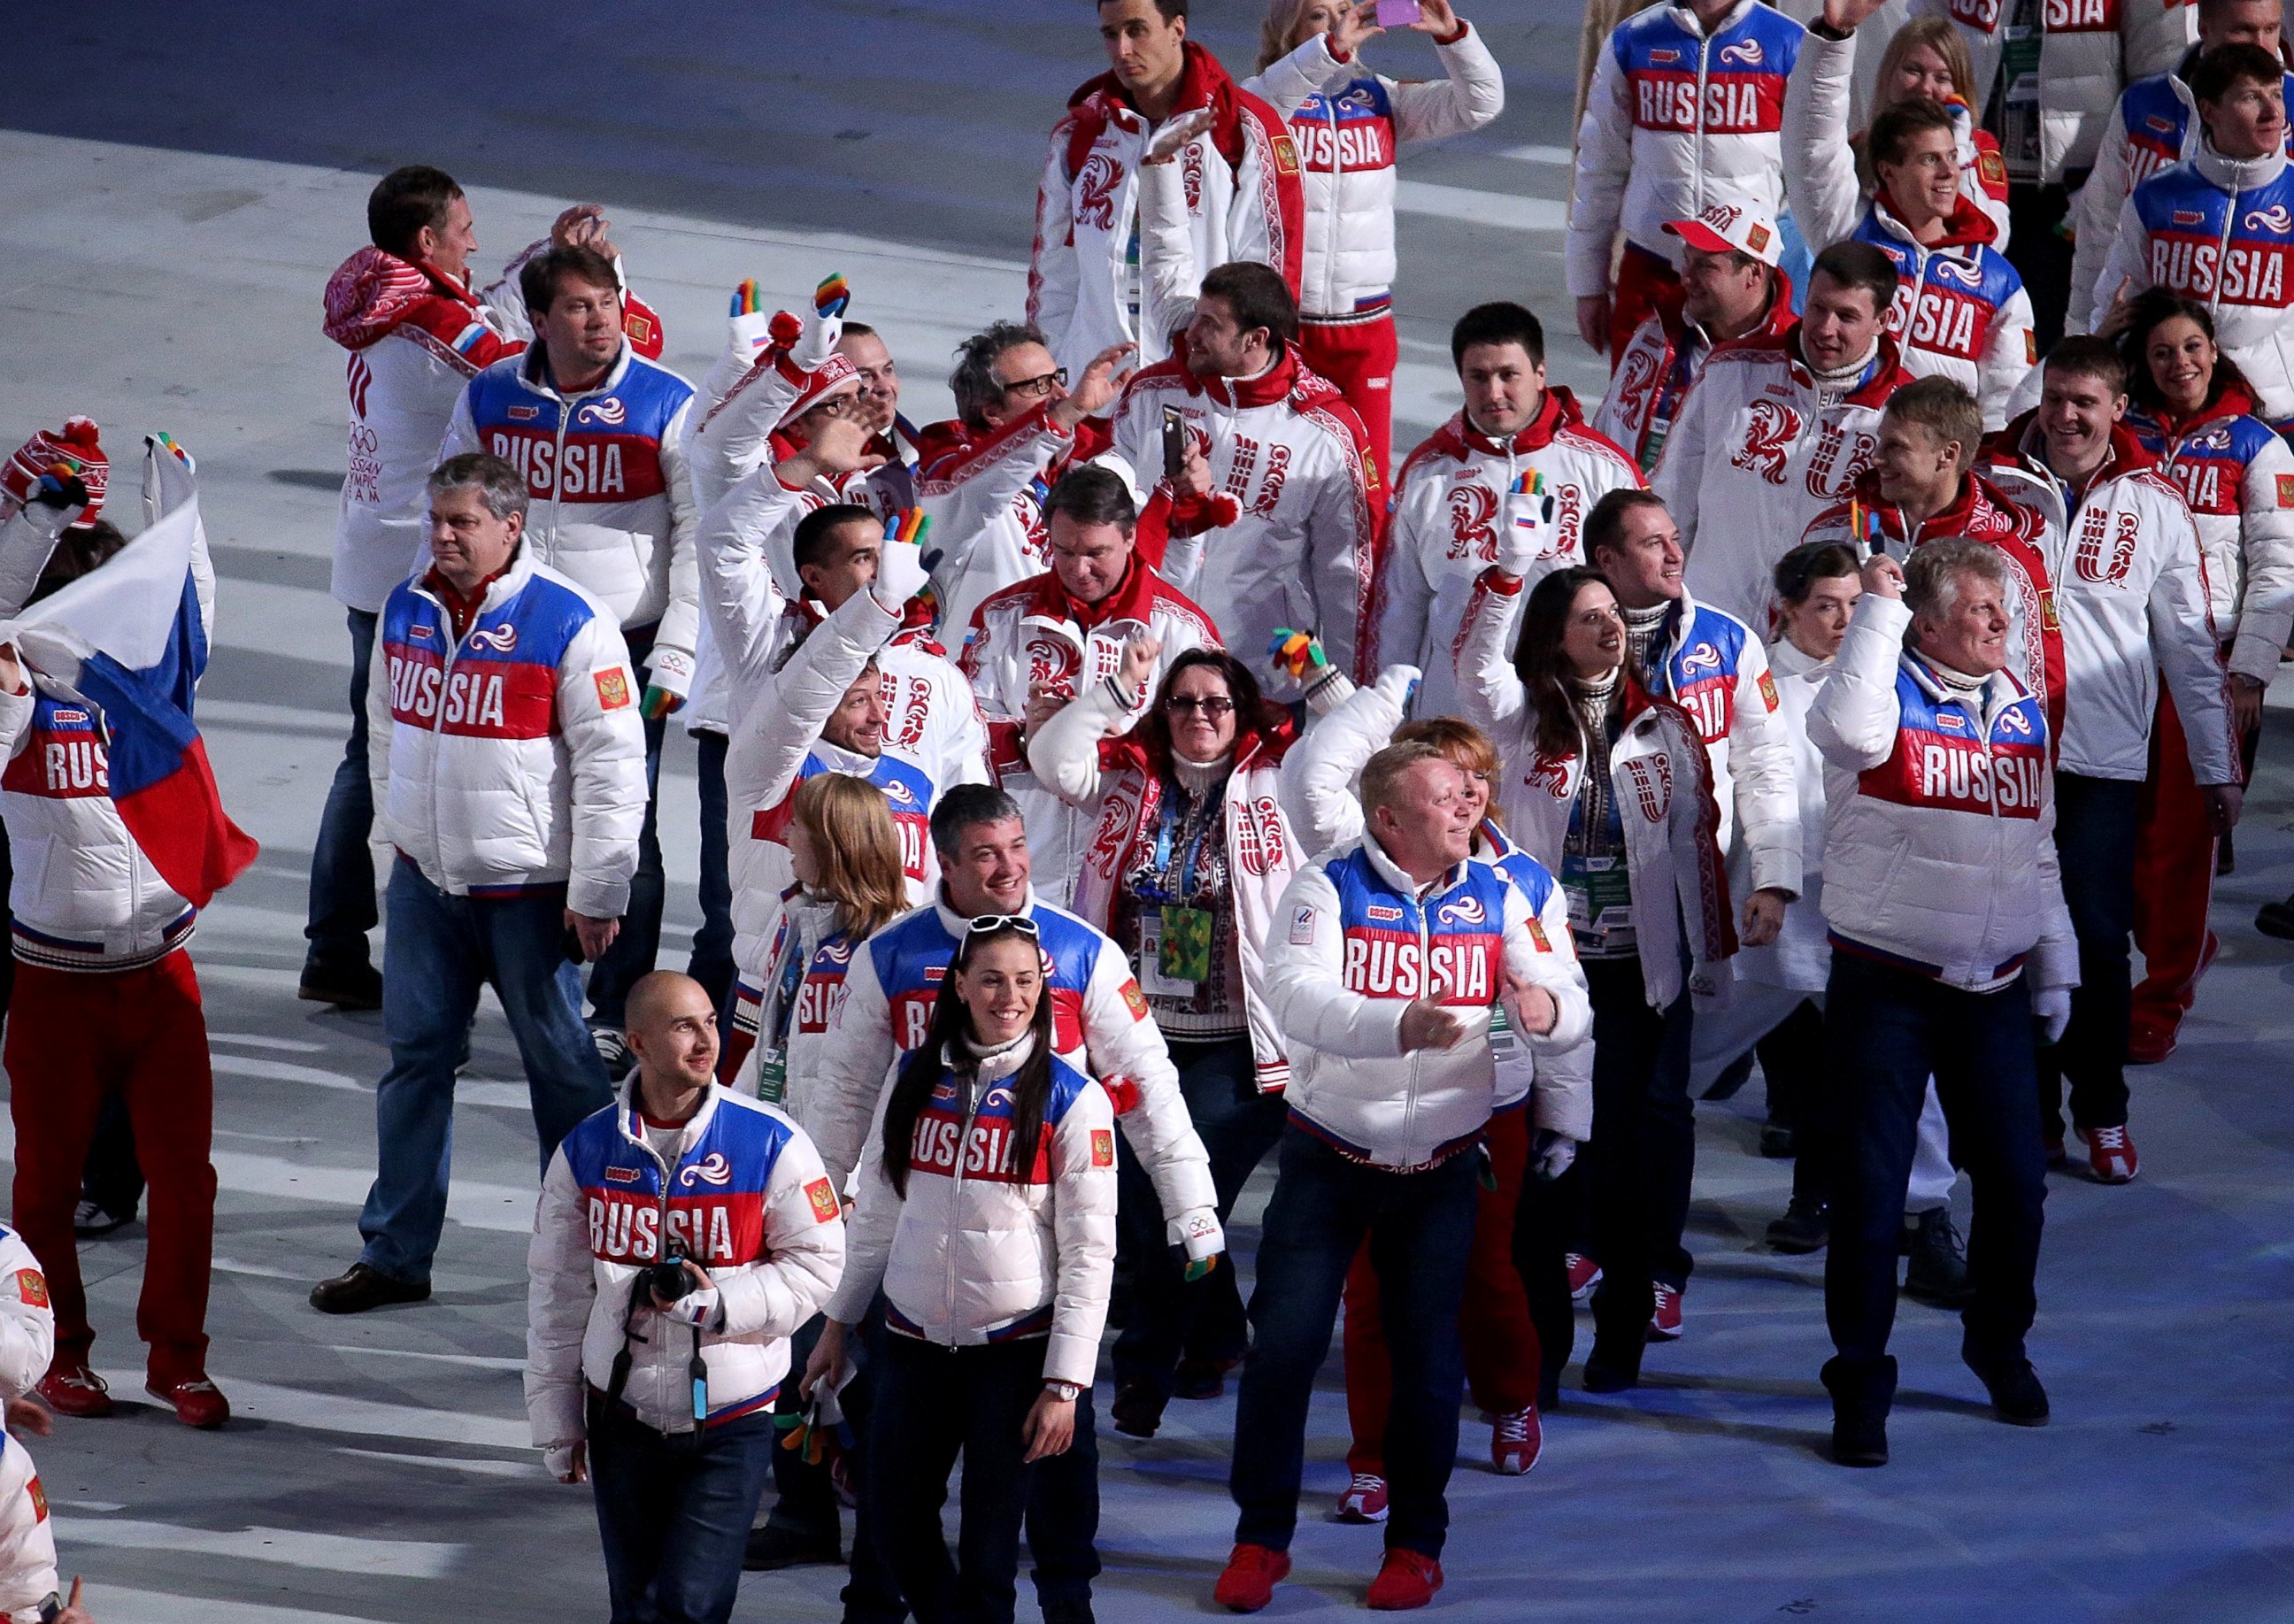 PHOTO: Team Russia enters Fisht Olympic Stadium during the Closing Ceremony for the Winter Olympics in Sochi, Russia, Feb. 7, 2014.